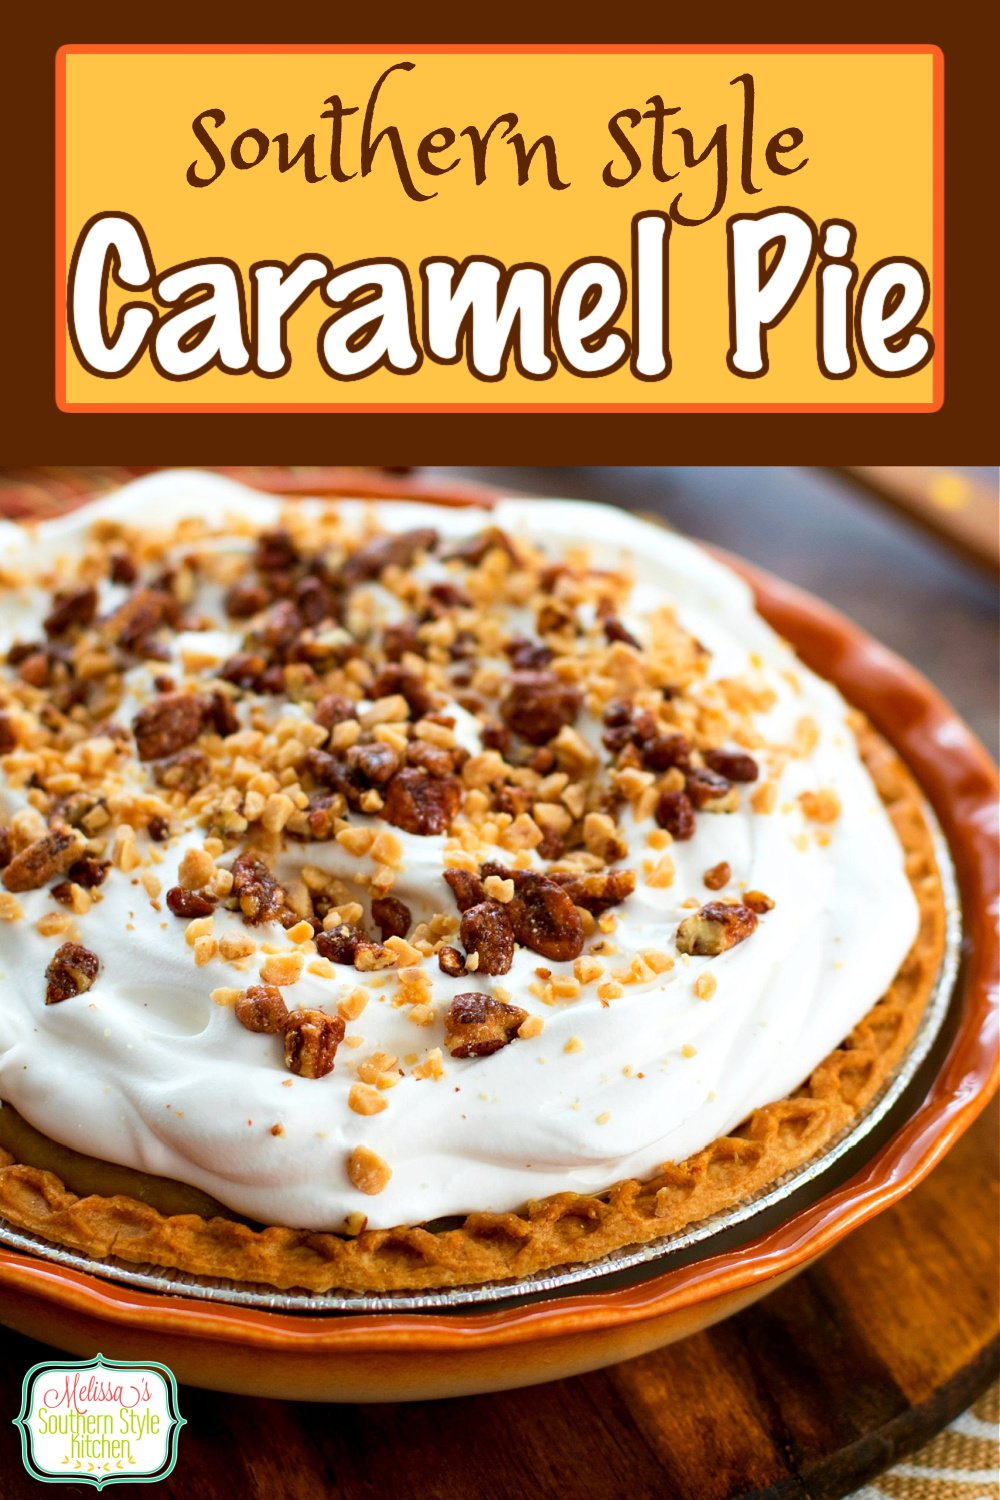 Rich and buttery Caramel Pie Recipe is a sweet ending to any meal #caramelpie #caramel #pierecipes #caramelpierecipe #desserts #dessertfoodrecipes #holidaypies #holidaydesserts #christmasdesserts #thanksgivingpierecipes #southernfood #southernrecipes #caramelpierecipe #homemadecaramelpie #bestcaramelpierecipe #southerncaramelpie via @melissasssk